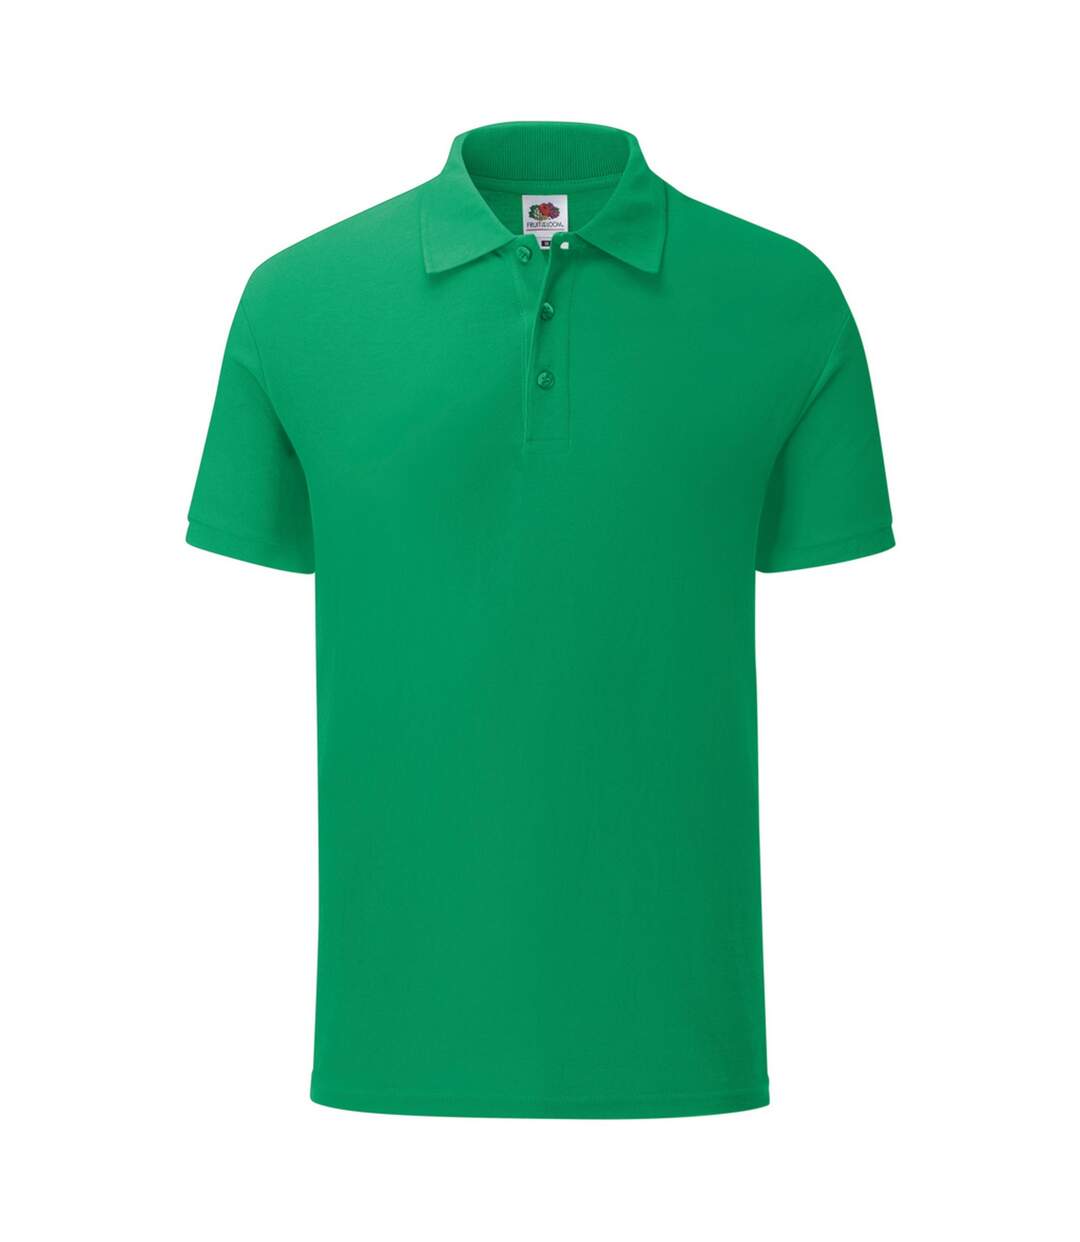 Fruit Of The Loom Mens Iconic Pique Polo Shirt (Kelly Green) - UTPC3571